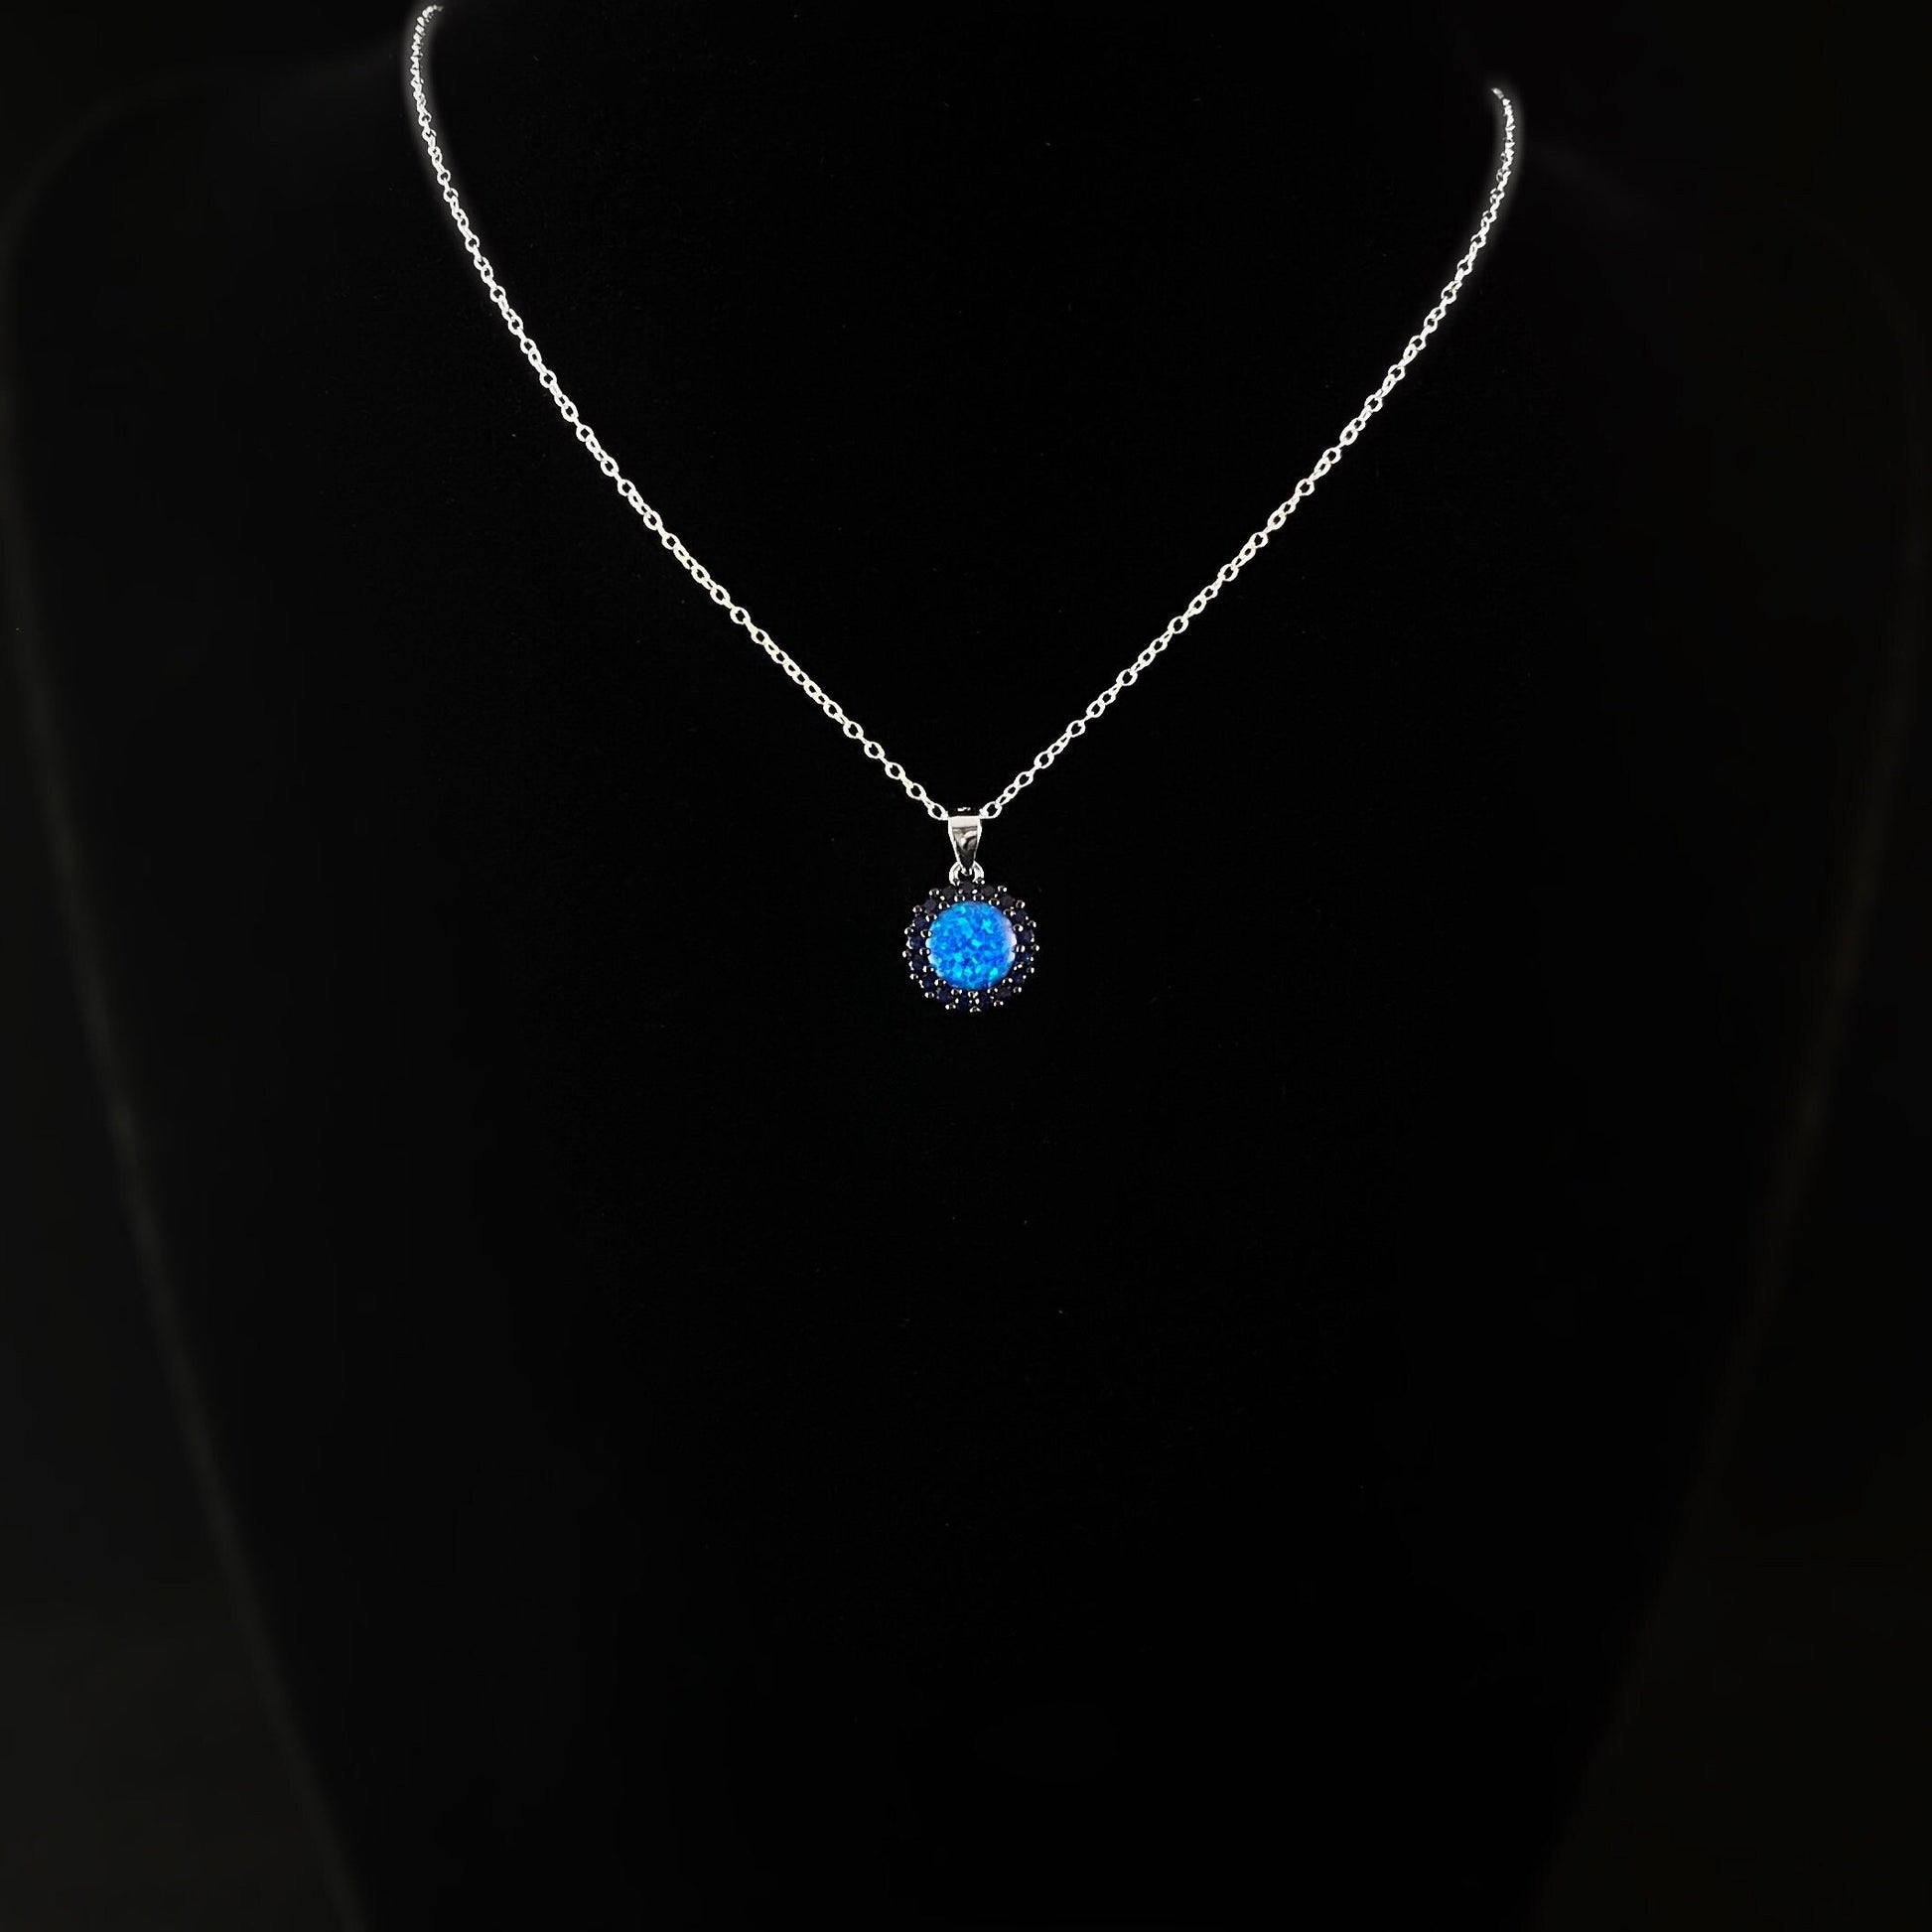 Elegant Silver Necklace with Opalescent Blue Crystal - Genevive